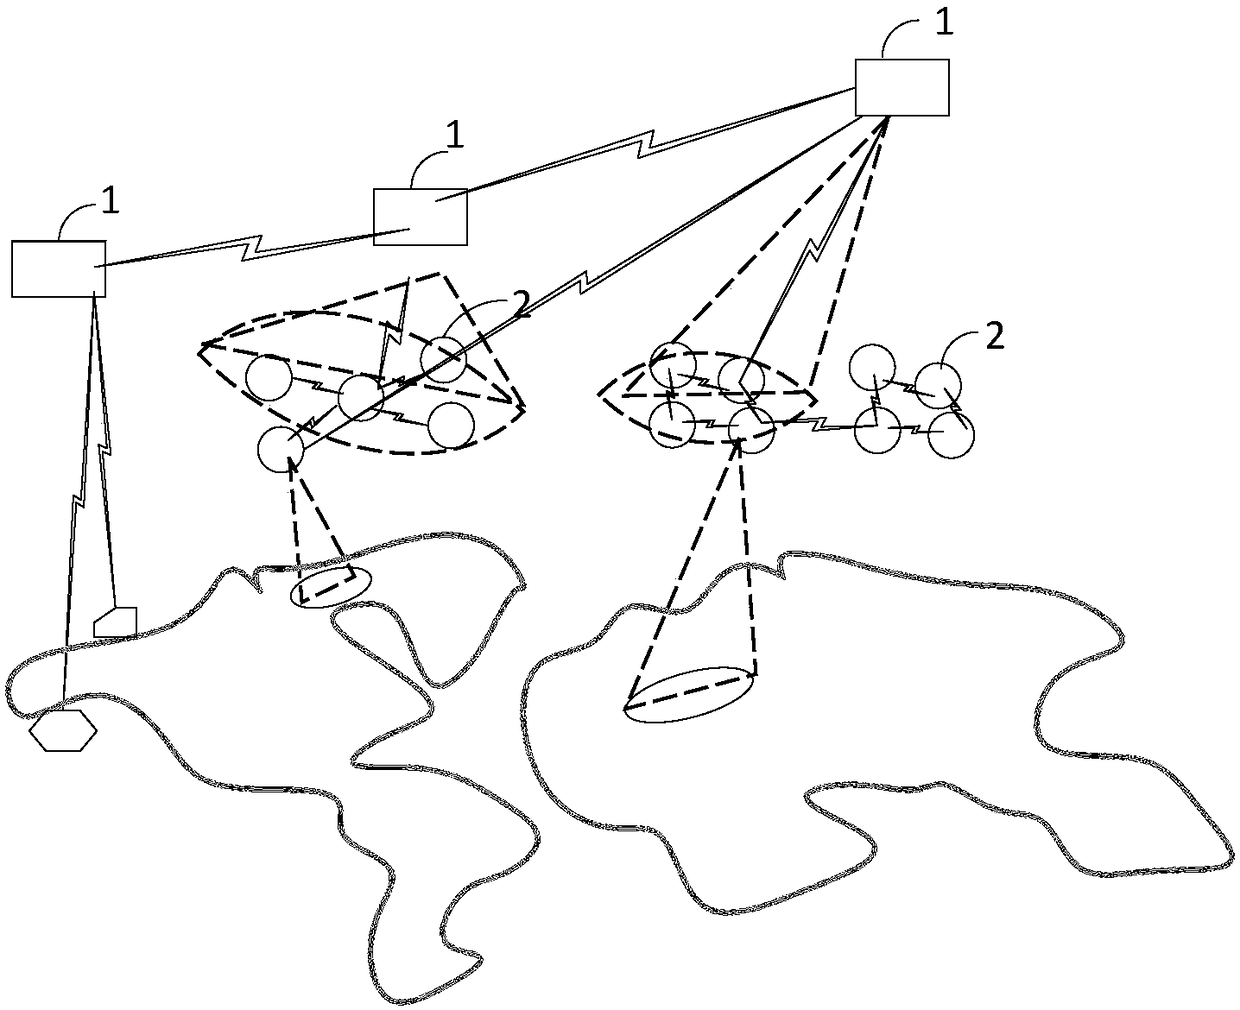 Communication method and system based on high and low orbit satellites